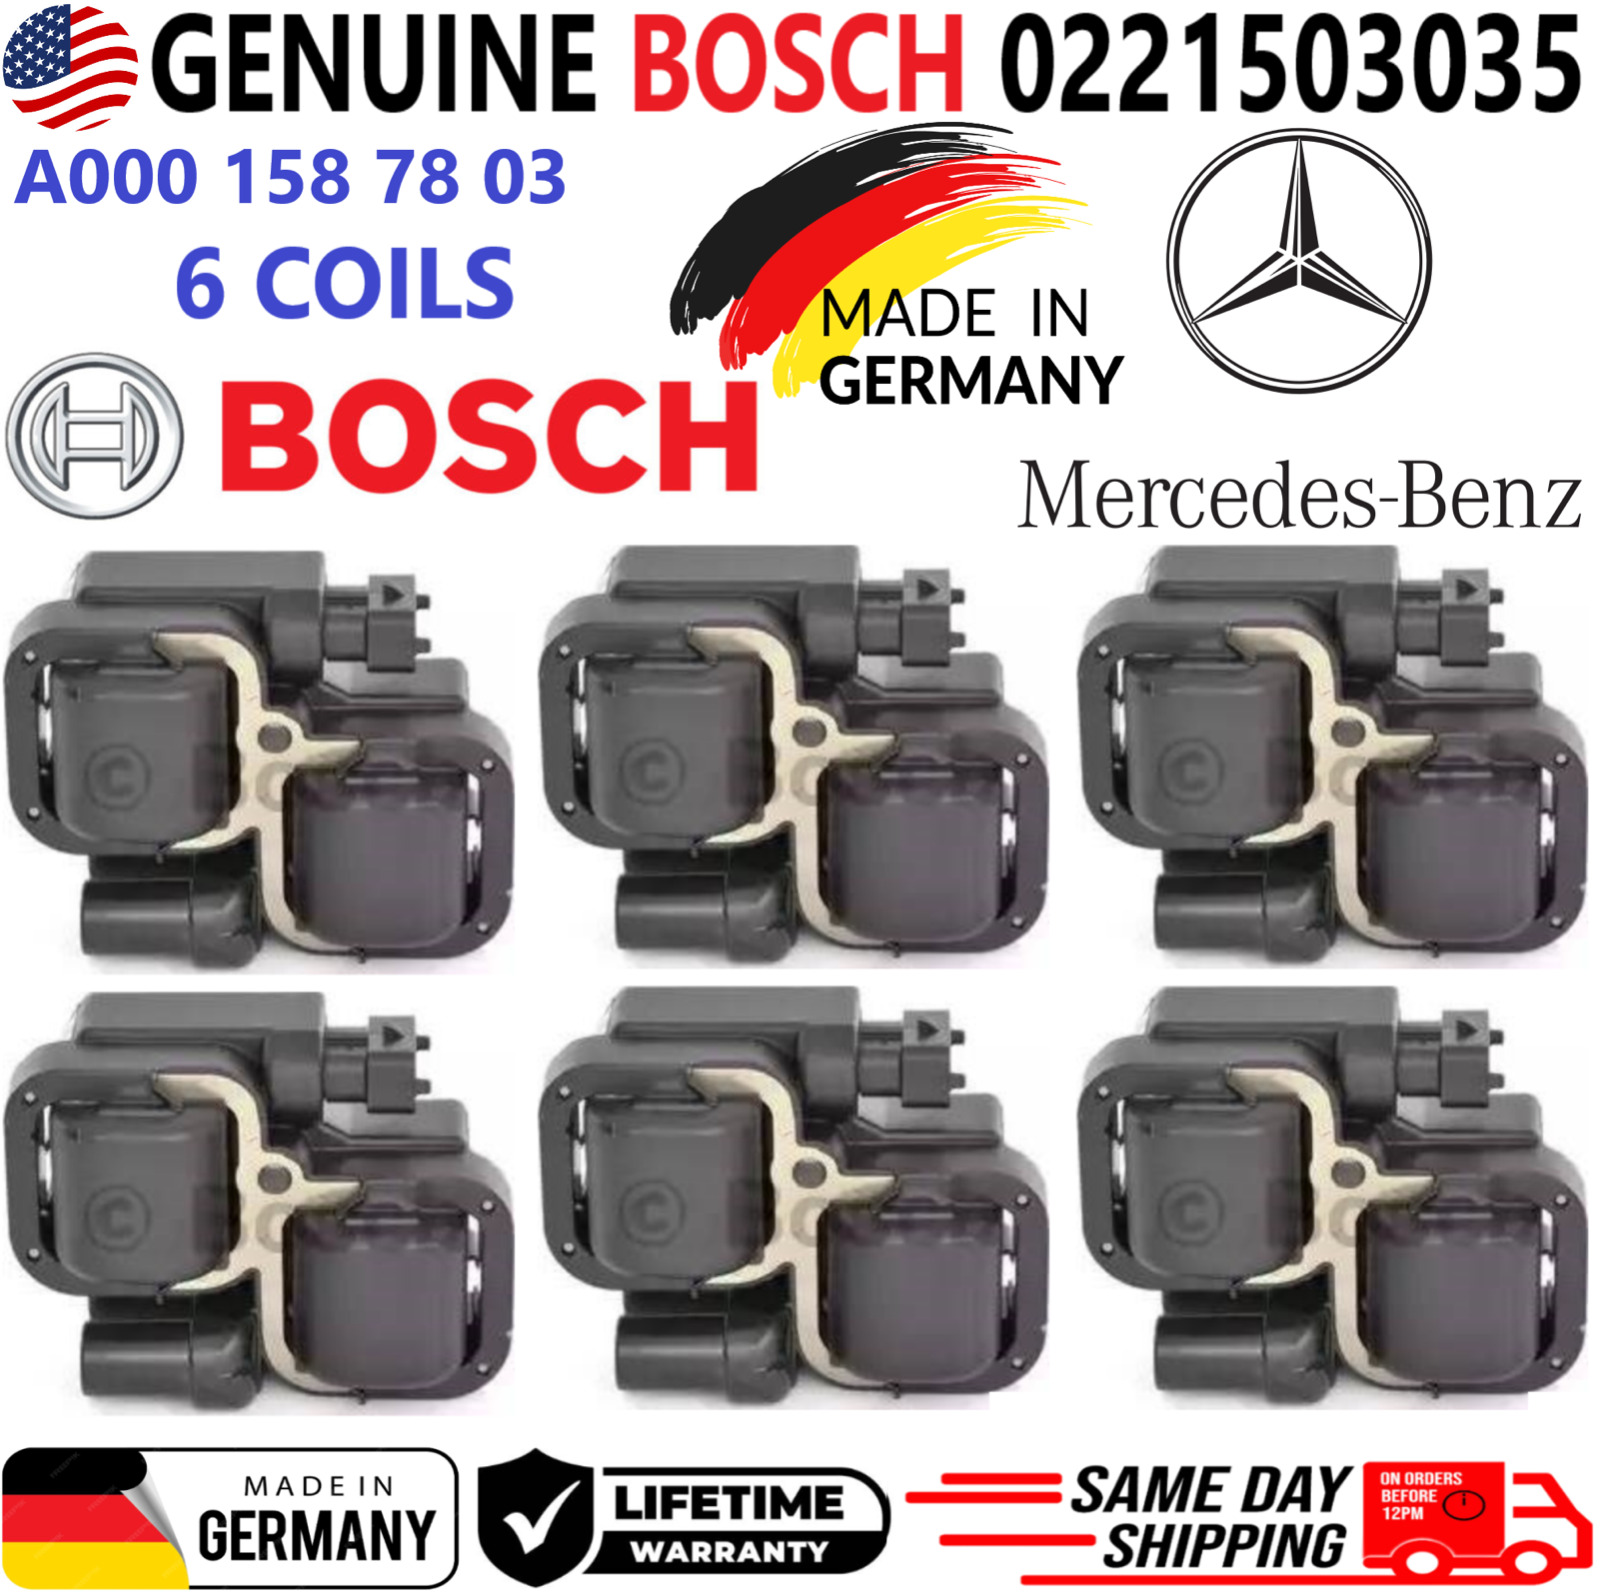 OEM BOSCH x6 Ignition Coils For 1998-2011 Mercedes-Benz A0001587803, 0221503035